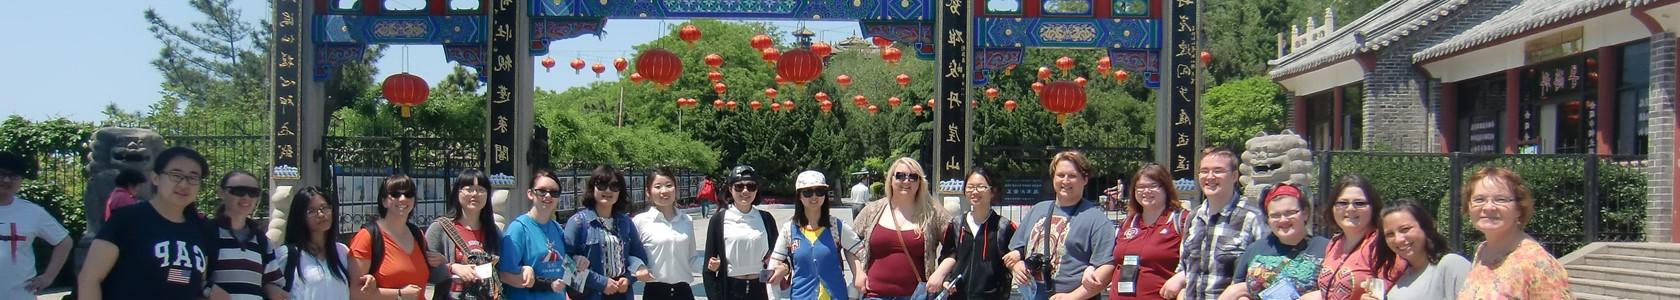 Study abroad students in front of architecture in China.